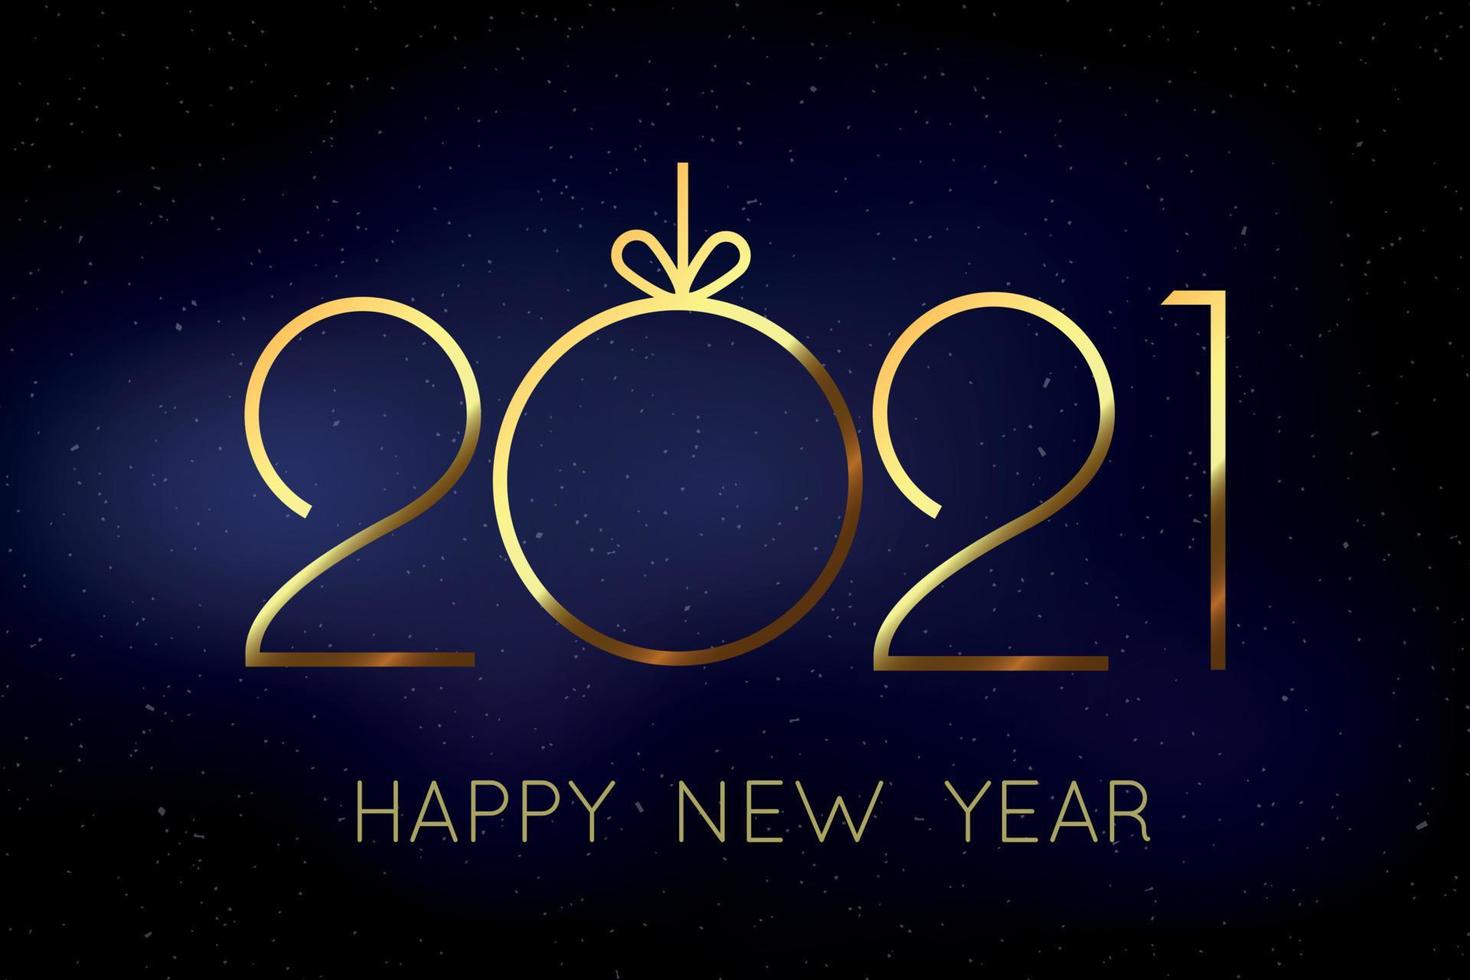 2021 New Year background with gold numbers. Festive premium desi vector